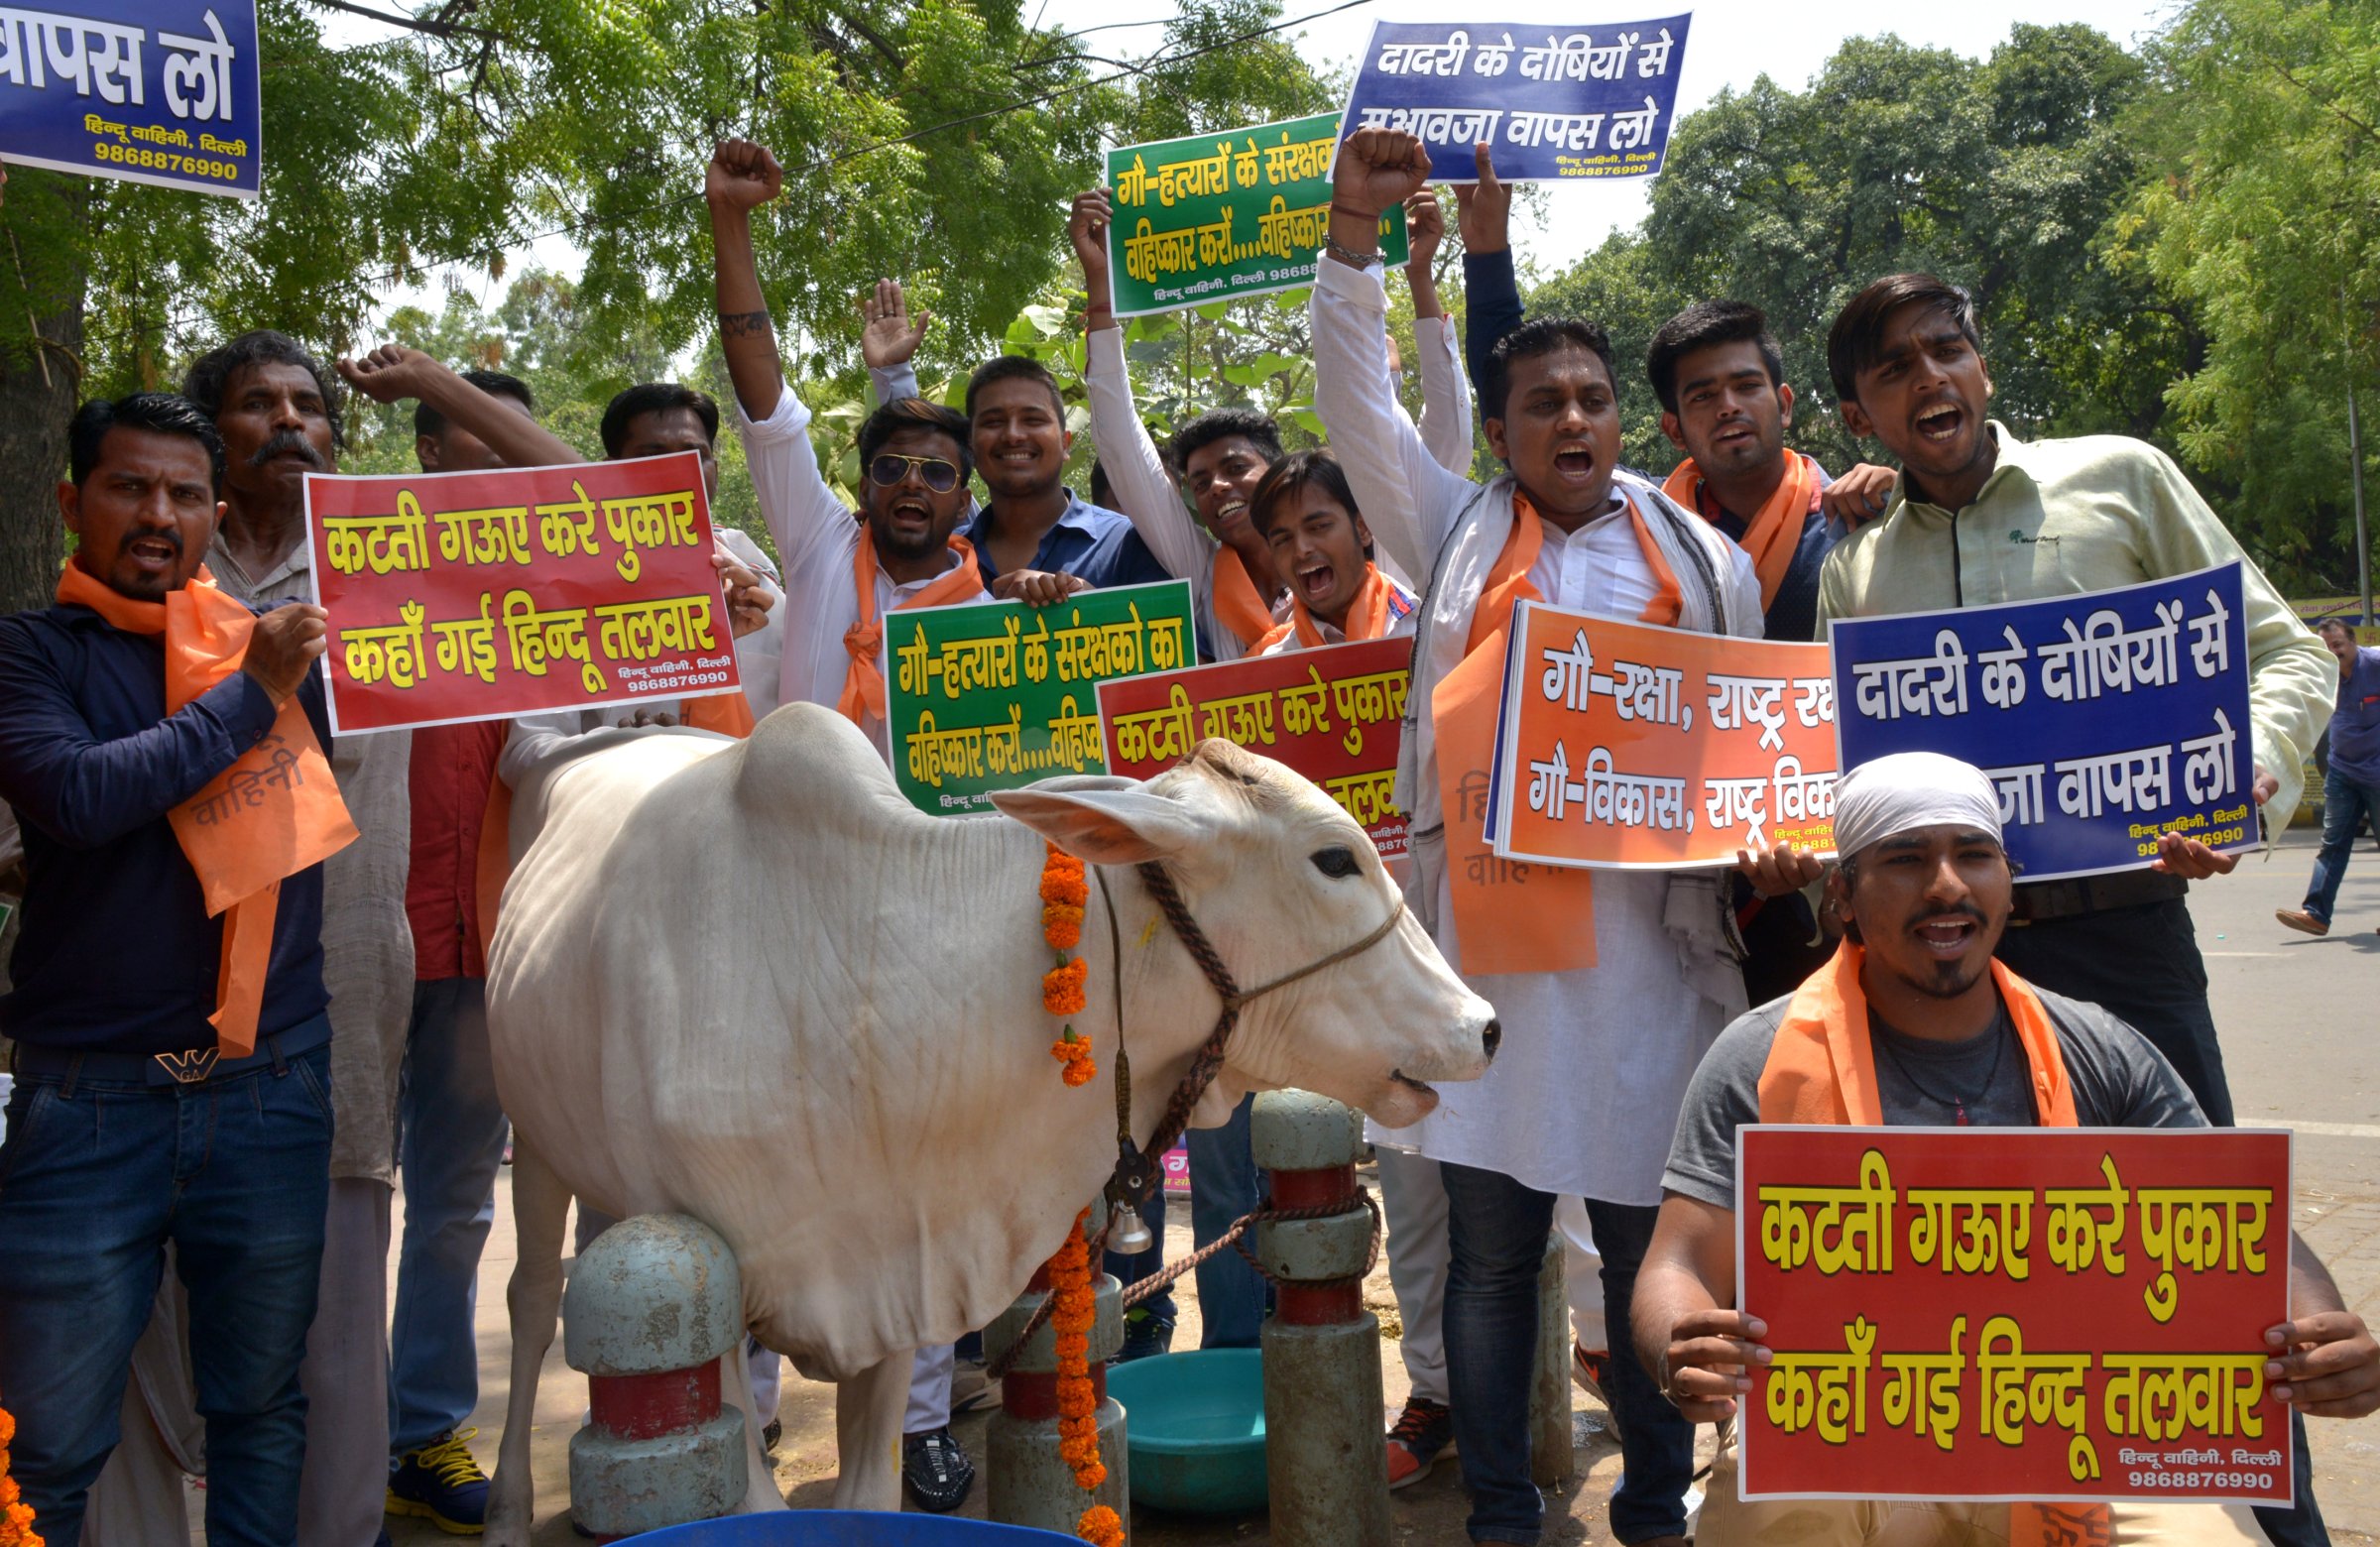 Protest march over cow protection